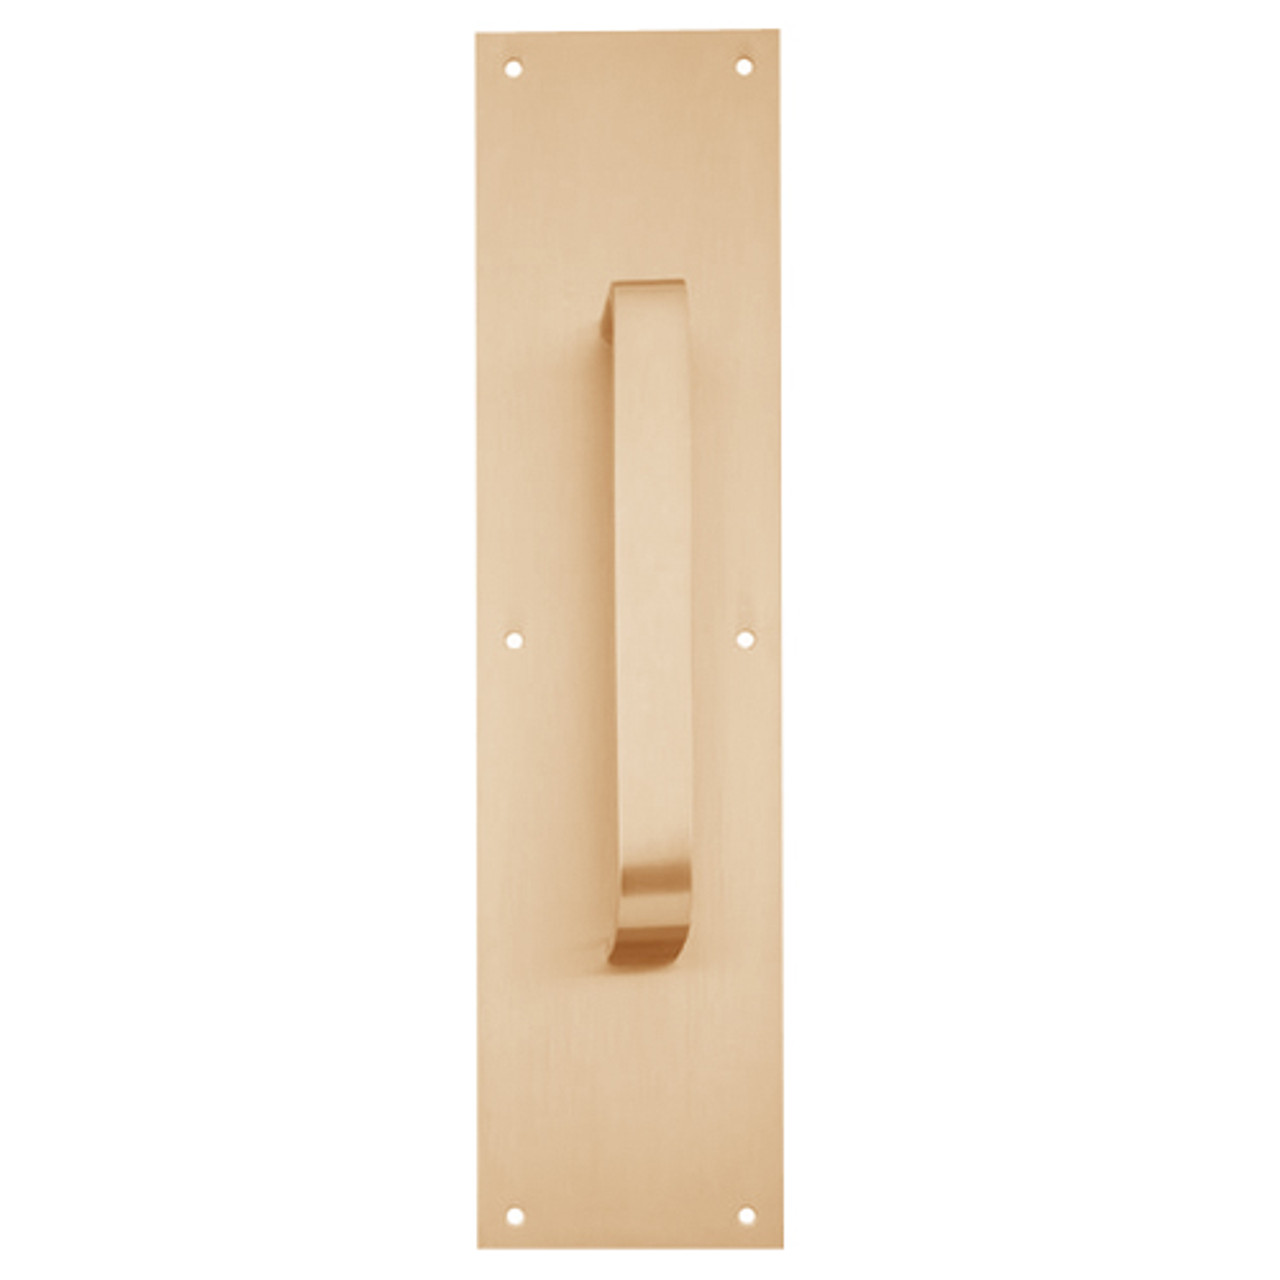 8305-8-US10-6x16 IVES Architectural Door Trim 6x16 Inch Pull Plate in Satin Bronze